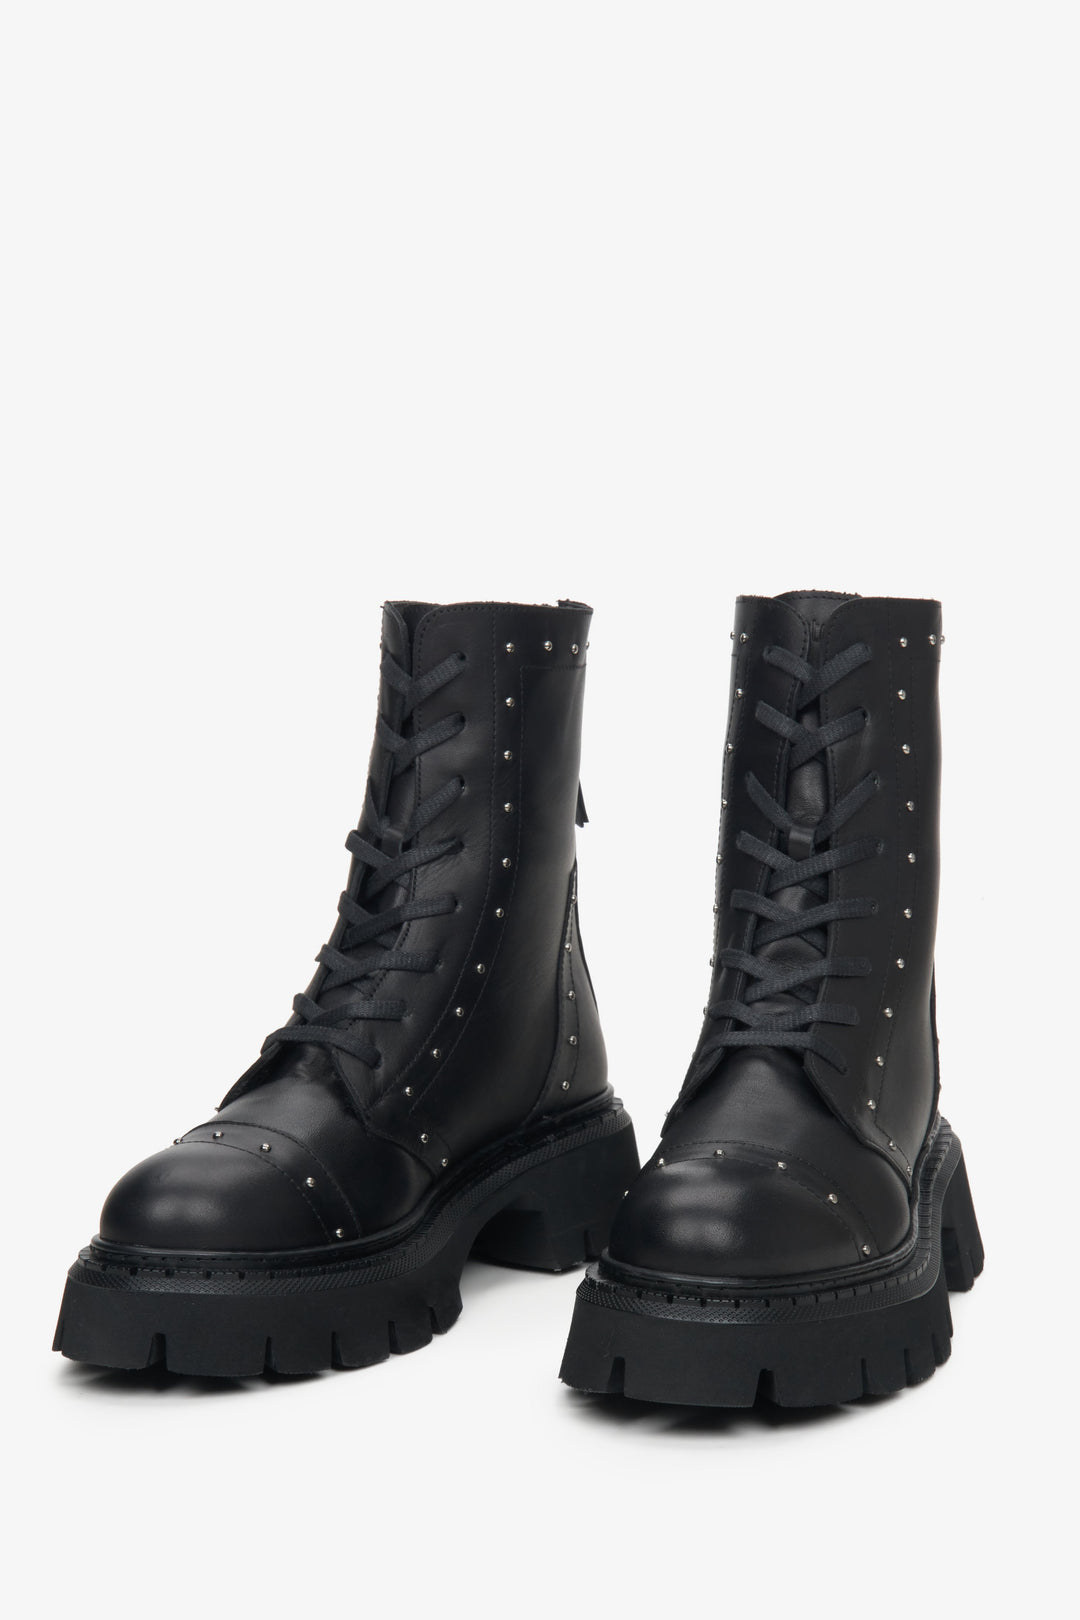 Women's black leather ankle boots with silver studs.